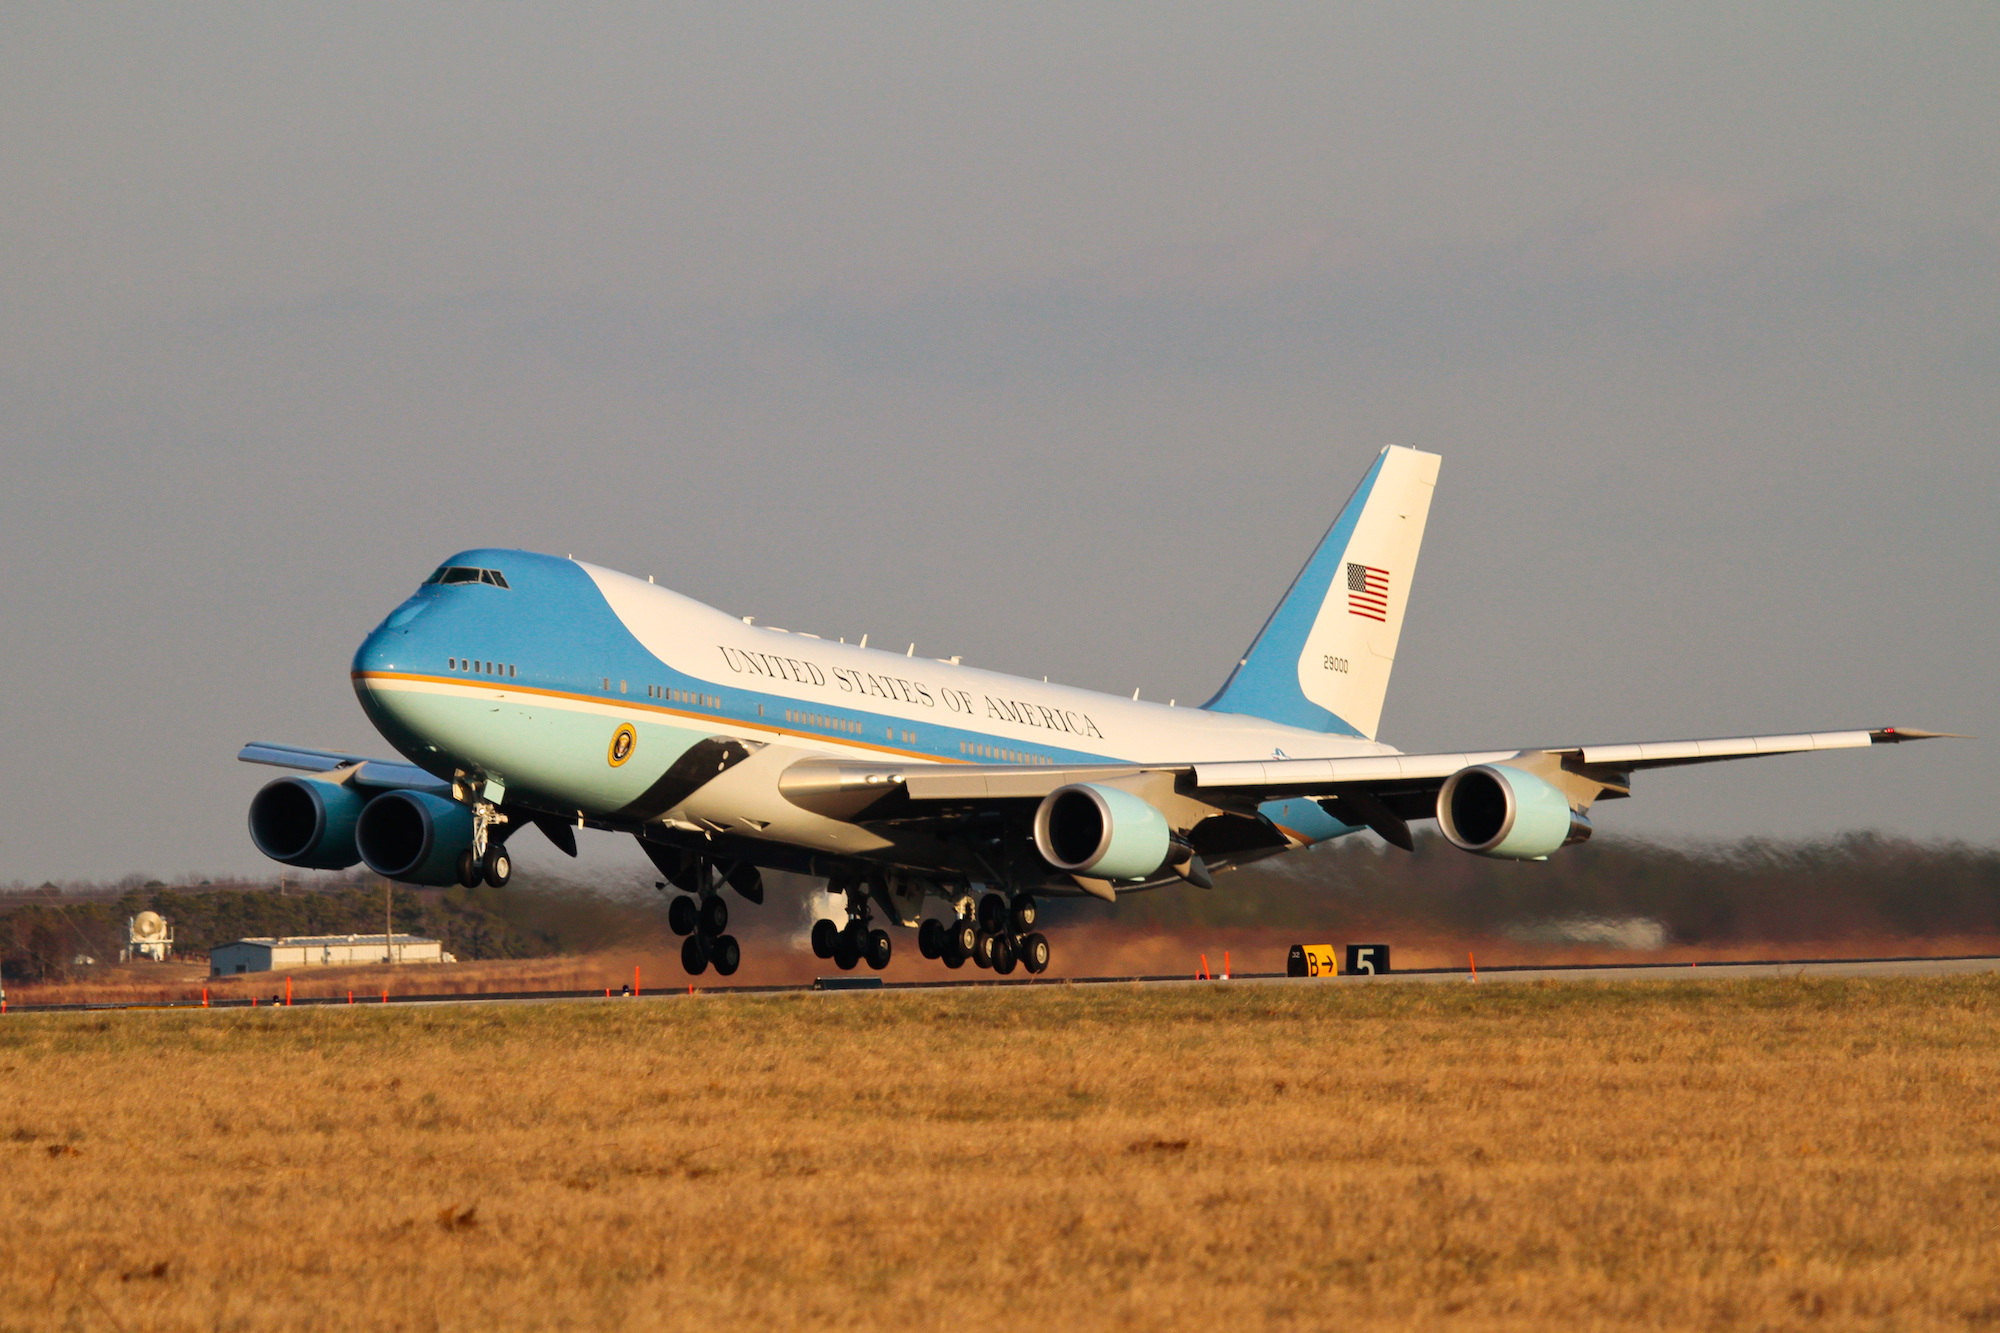 The new Air Force One arrives in 2024. Here’s what we know so far.